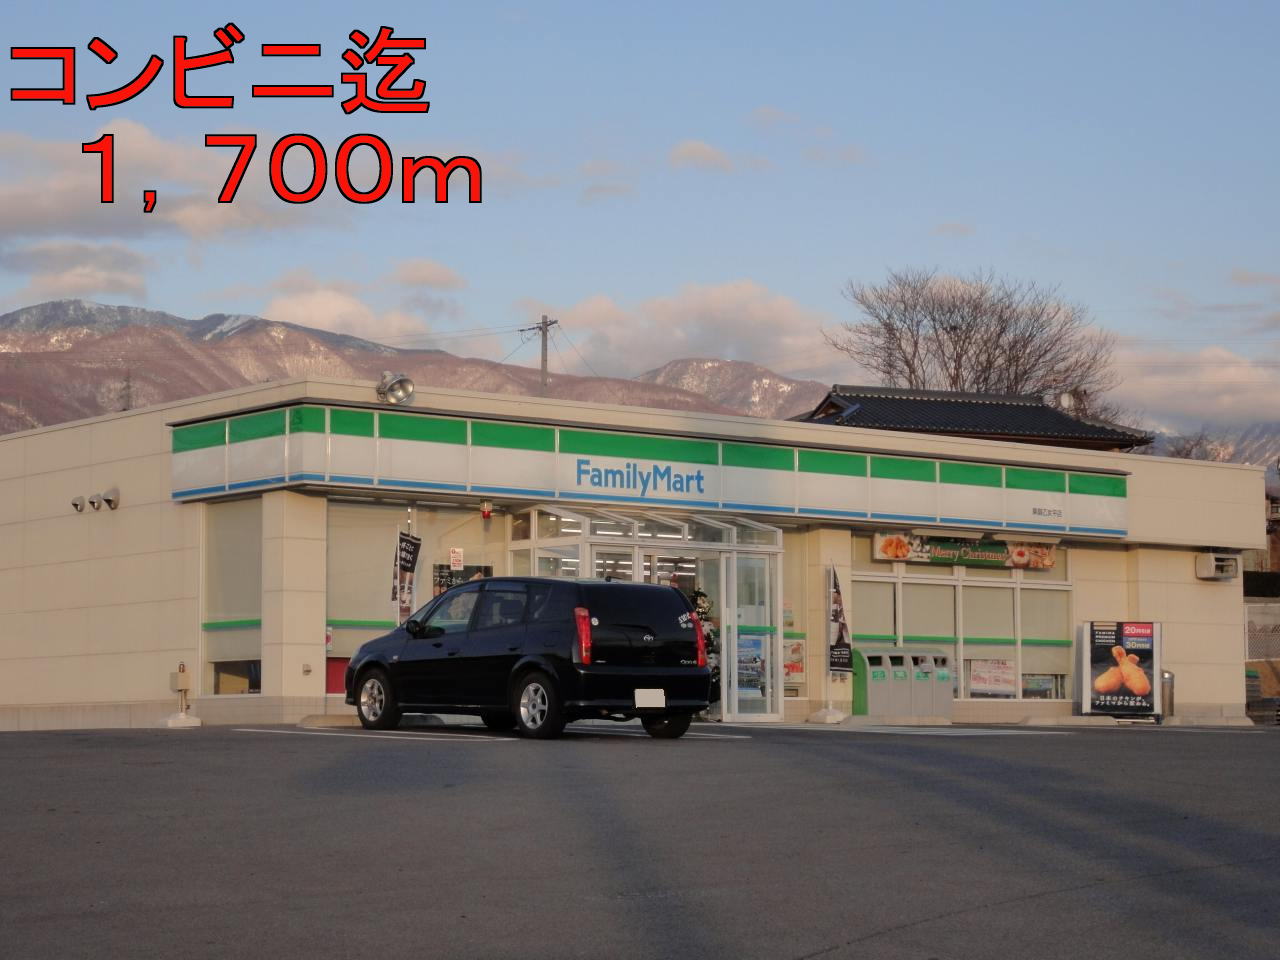 Convenience store. FamilyMart east your maiden Hiramise (convenience store) up to 1700m